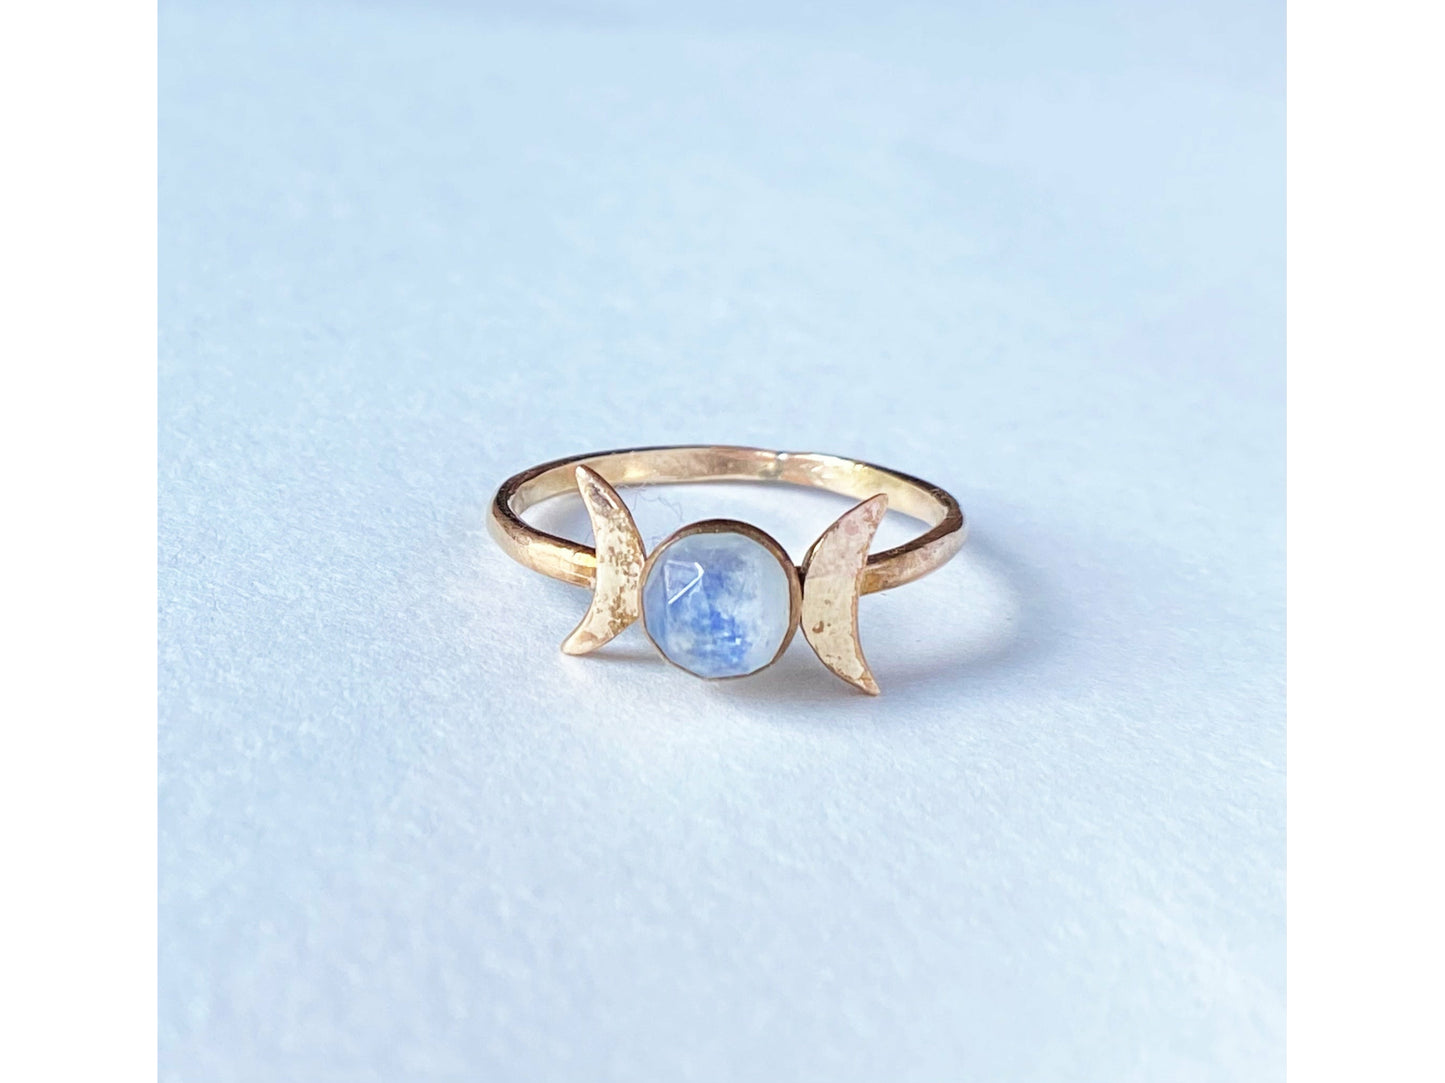 Two moons on the left and right of the stone, moonstone set at focal. Made out of gold filled.